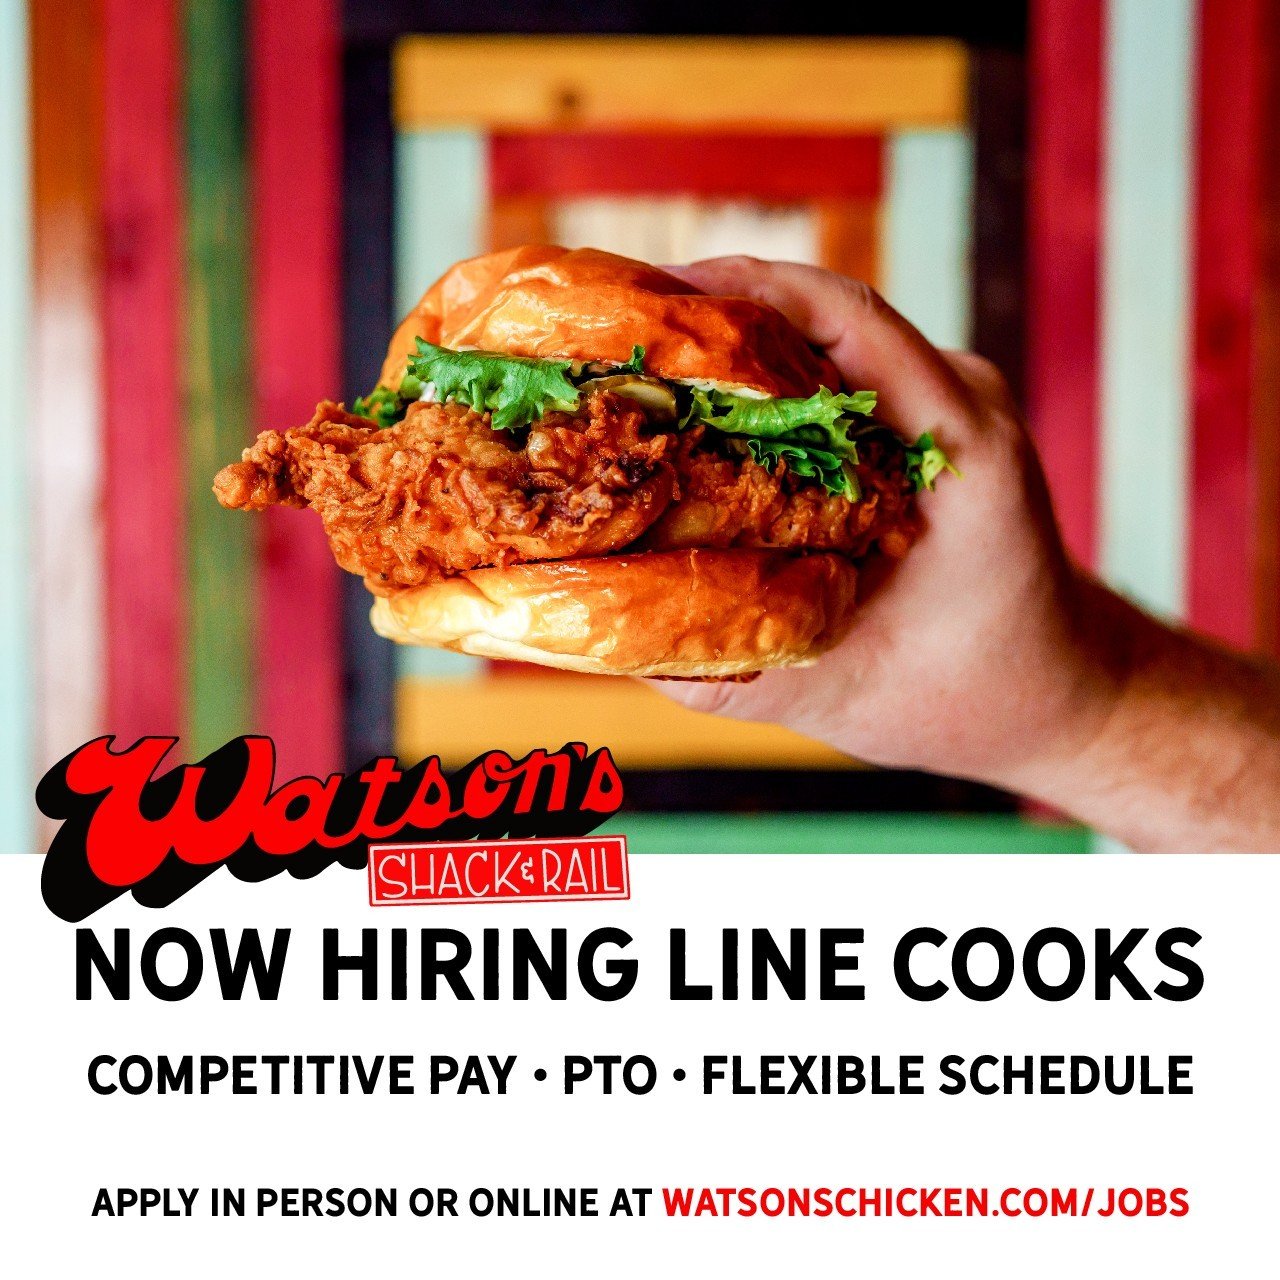 Join the Kitchen Team at the Shack! We're hiring experienced line cooks. We offer competitive pay, flexible scheduling, and PTO to full time employees. Apply in person at Watson's downtown or online at https://www.watsonschicken.com/jobs (link in bio